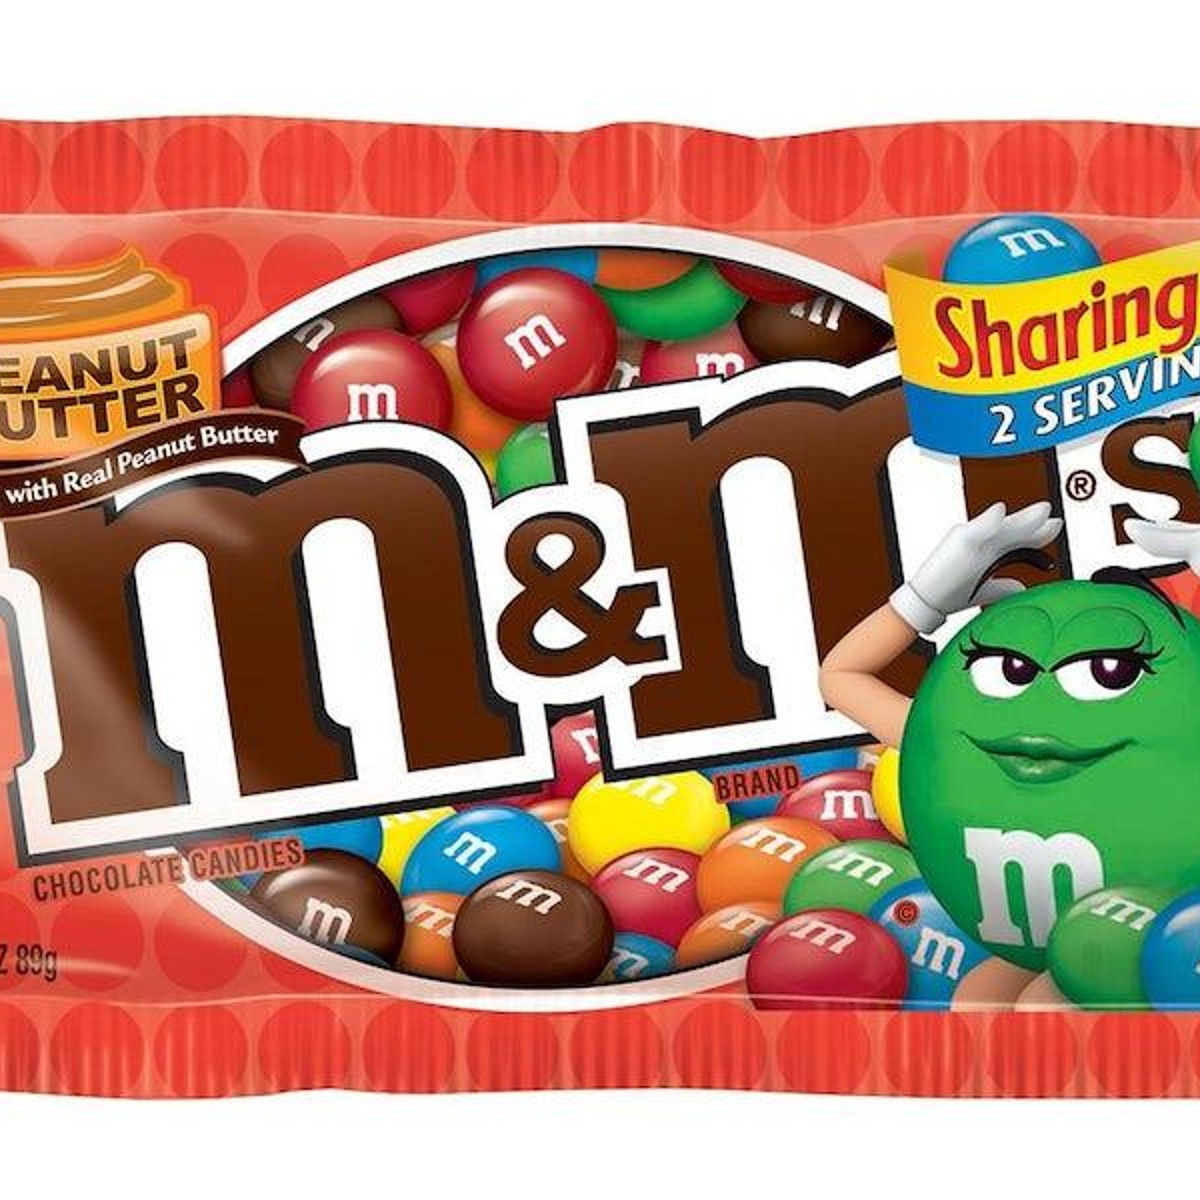 M&M Mint Dark Chocolate Candy 9.6oz - Pack of 2, Pack of 2 - Kroger